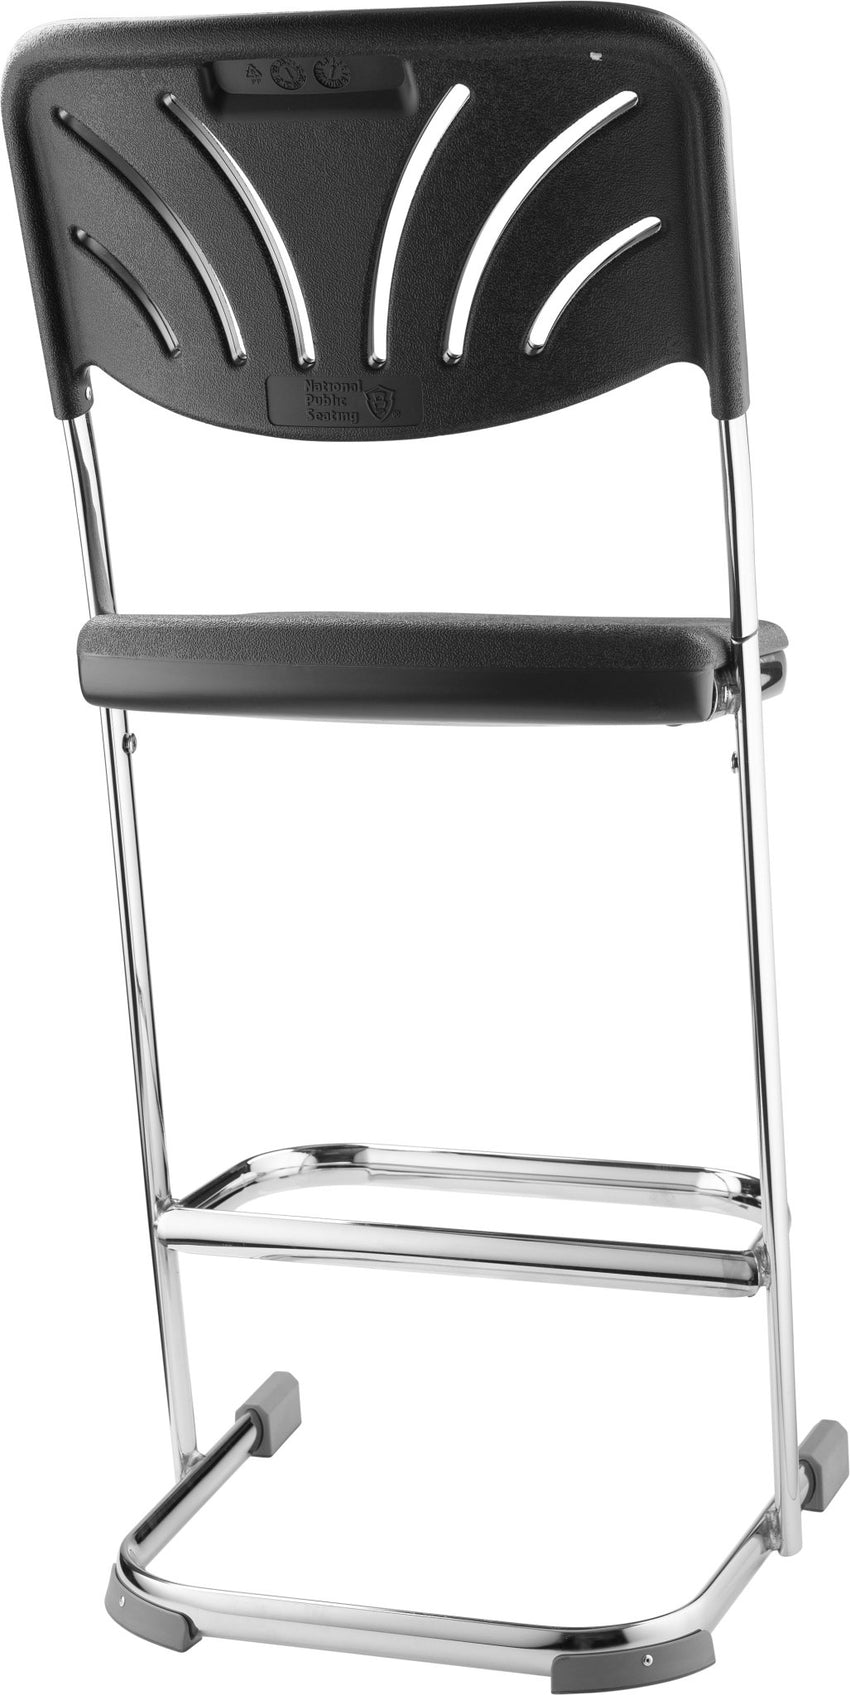 NPS Elephant Z-stool 24" H Stool with Blow Molded Seat and Backrest (National Public Seating NPS-6624B) - SchoolOutlet